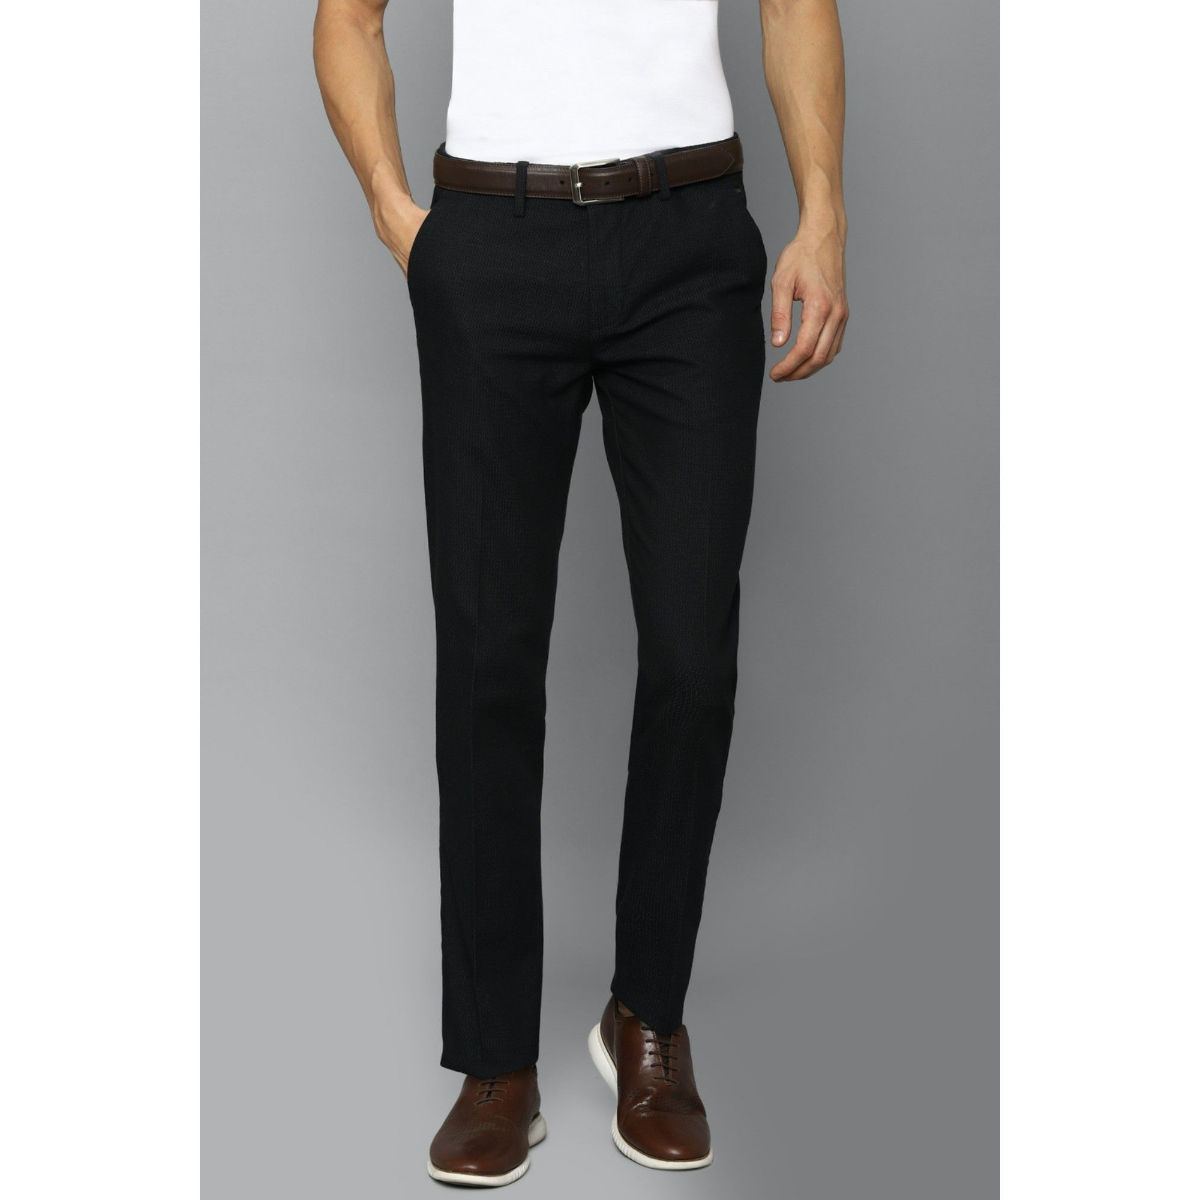 Buy Louis Philippe Beige Regular Fit Formal Pleated Trousers for Mens Online   Tata CLiQ